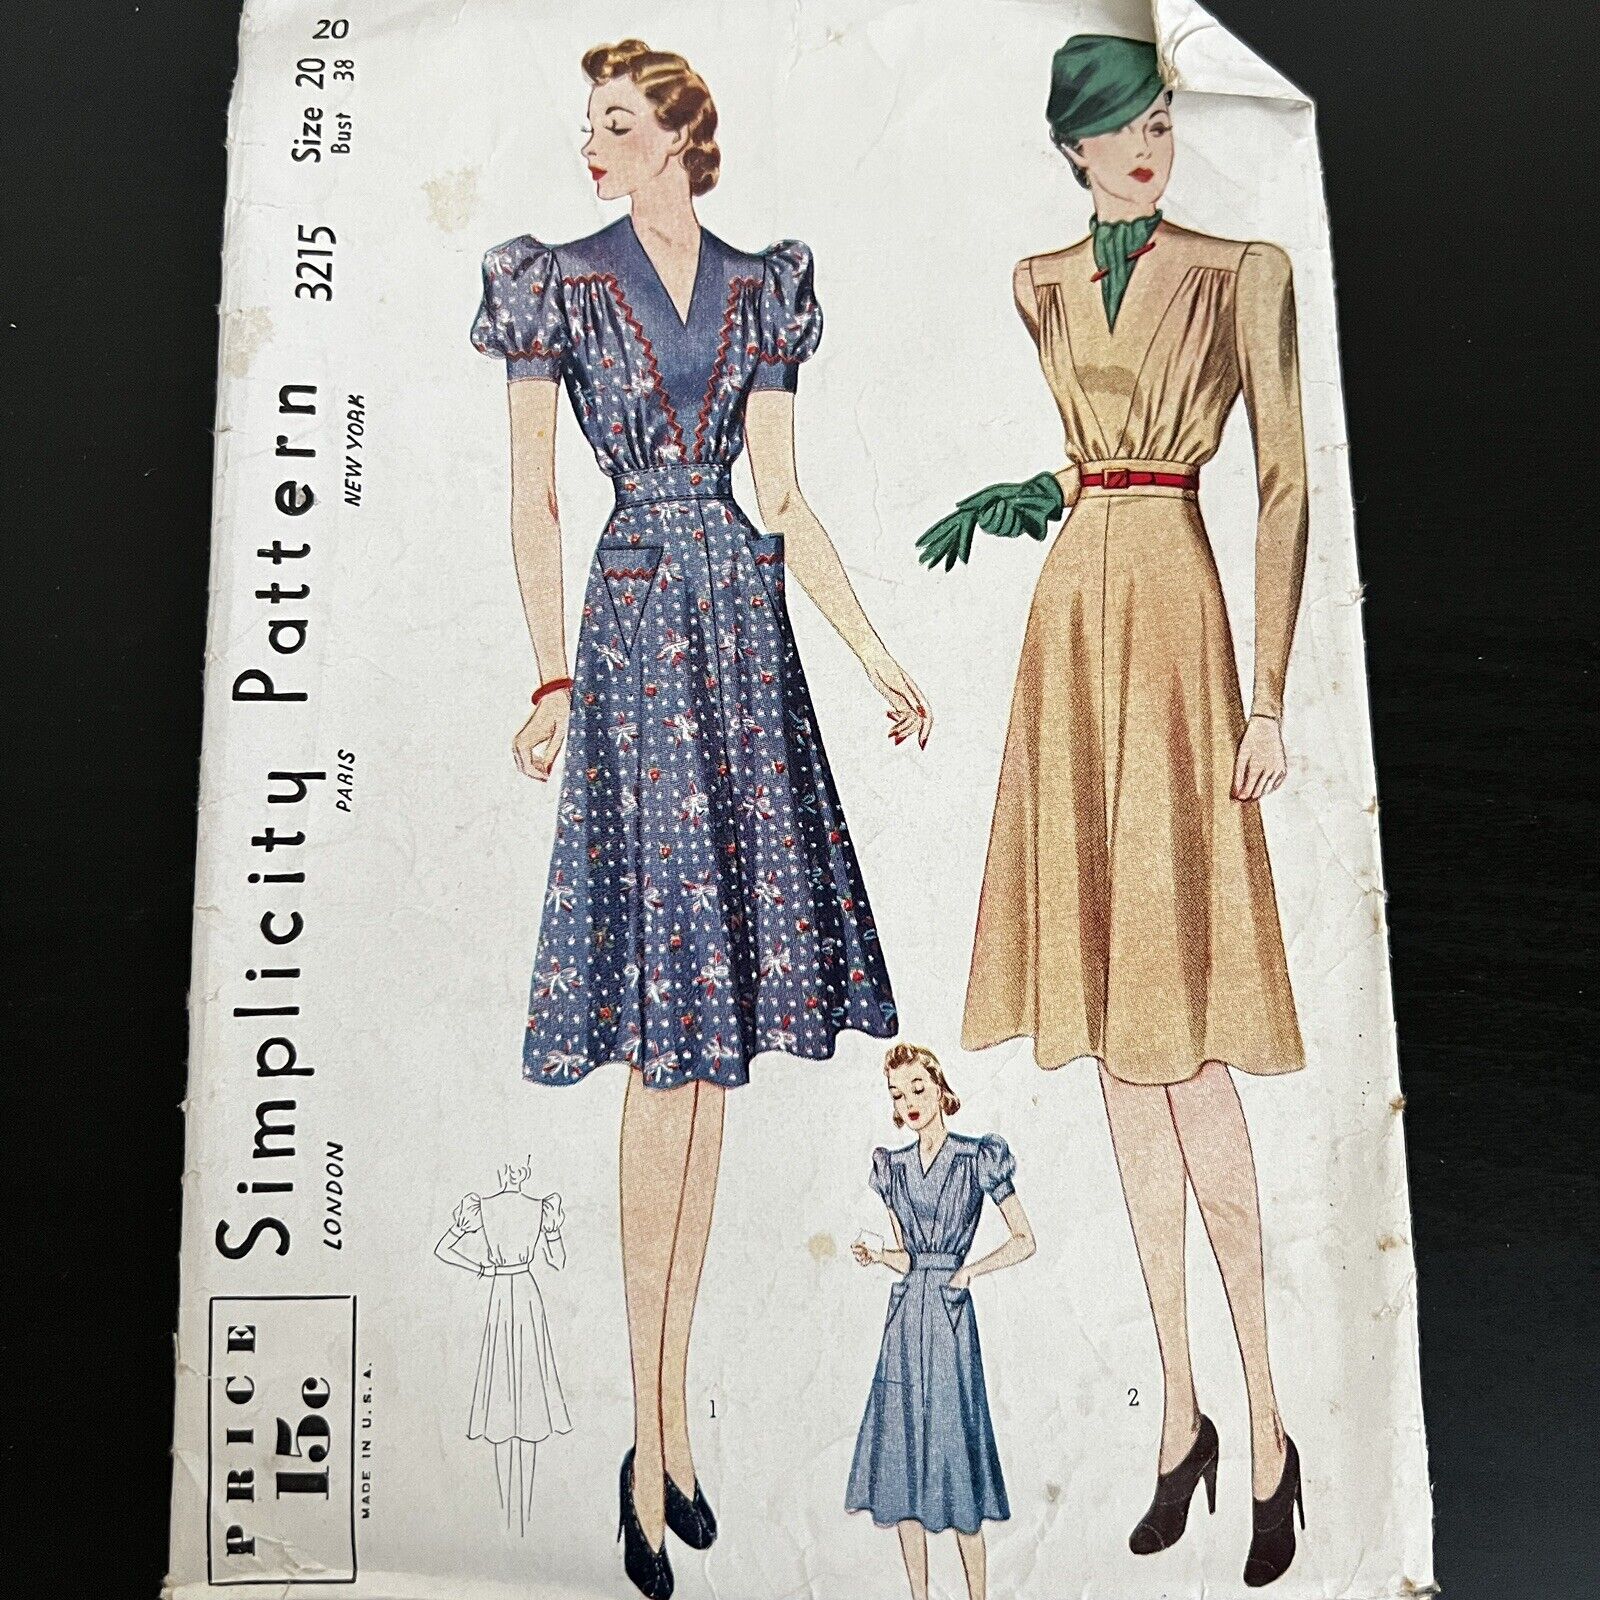 Vintage 1930s Simplicity 3215 Puff Sleeve  Yoked Dress Sewing Pattern 20 USED